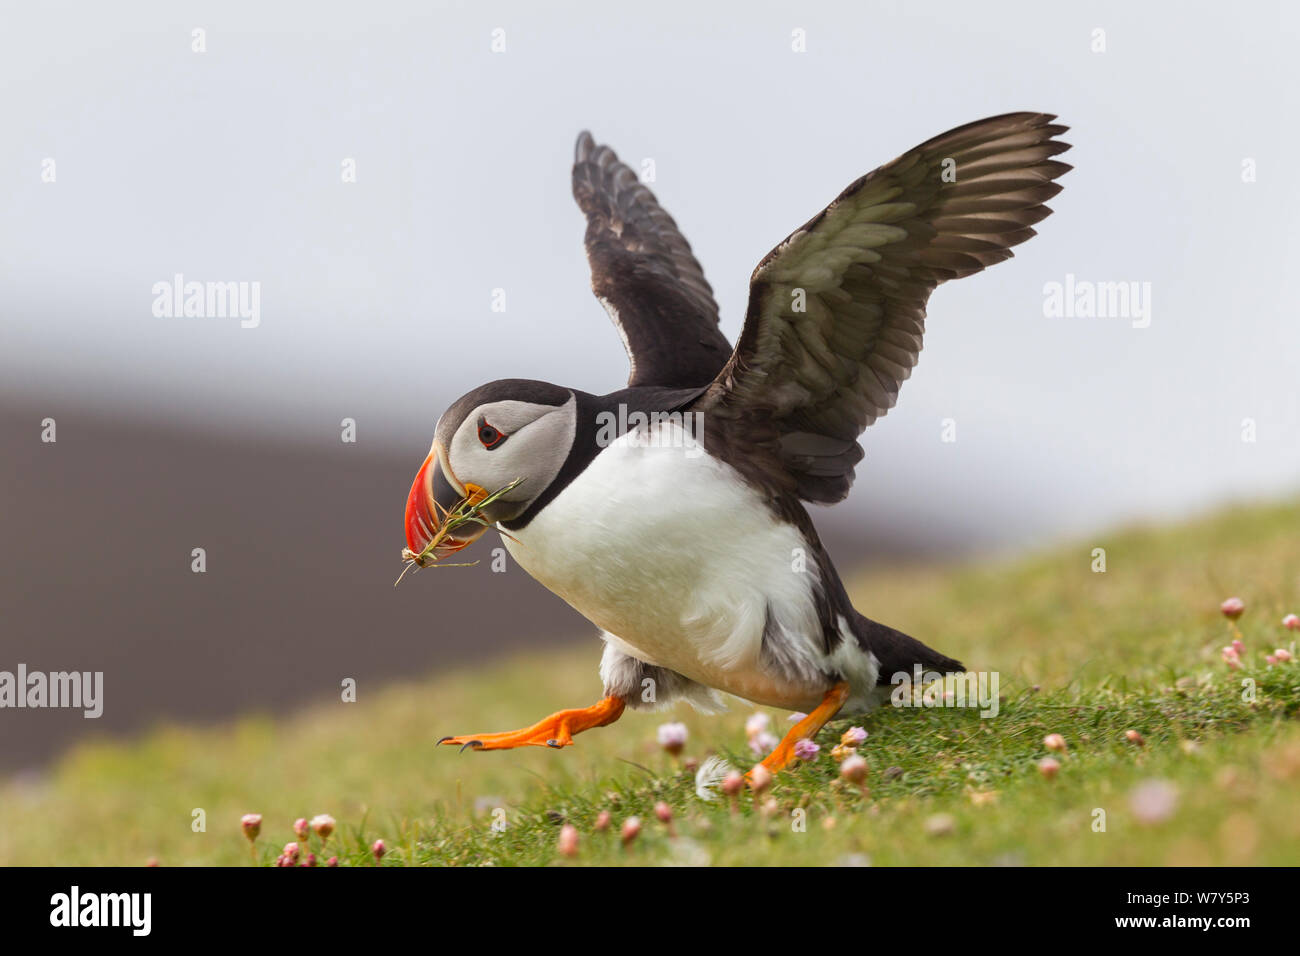 An Atlantic puffin (Fratercula arctica) runs with wings outstretched carrying a beakful of nesting material which it will use to line its nest, Fair Isle, Shetland Islands, United Kingdom. June. Stock Photo